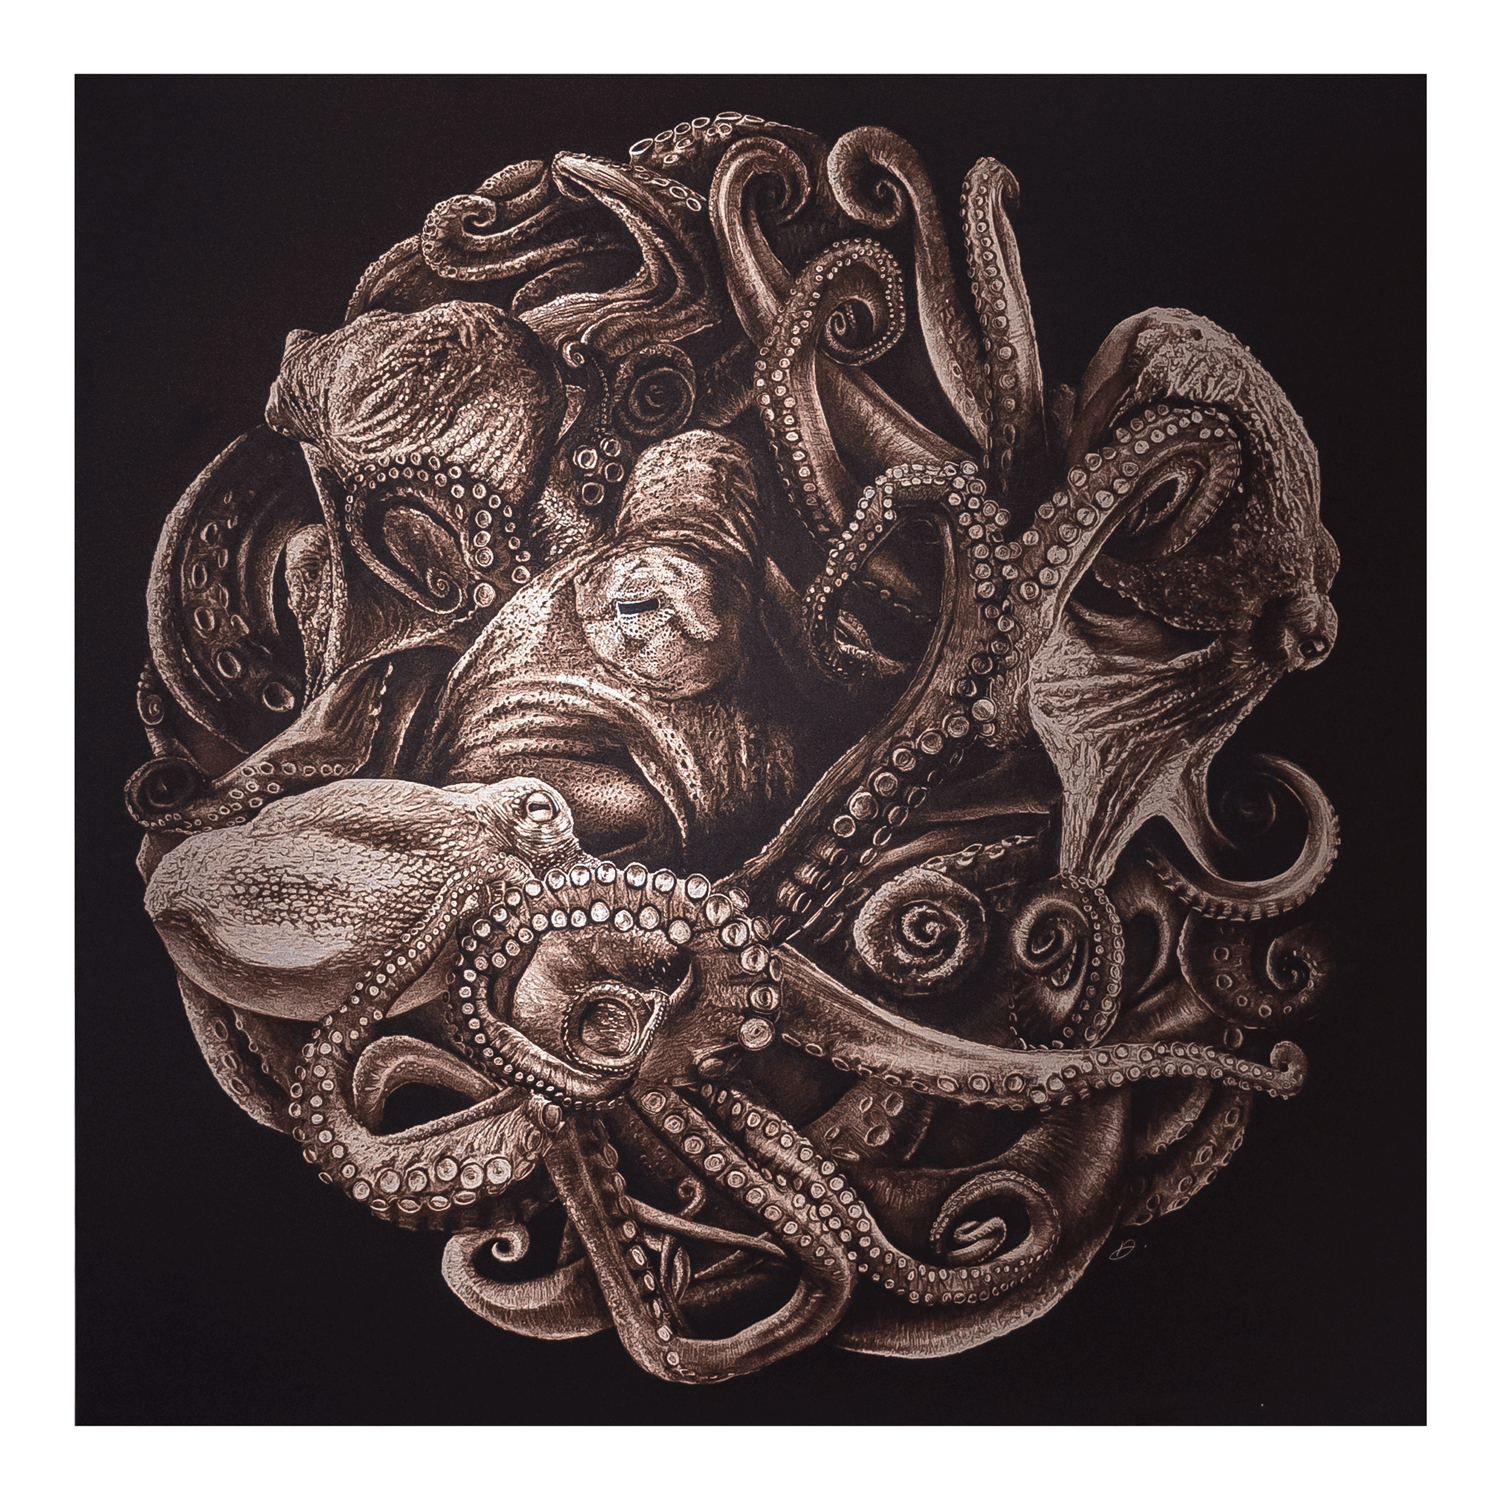 METAL Octopus Planet - LIMITED EDITION METAL PRINT (1 of 3) - Danny Branscombe